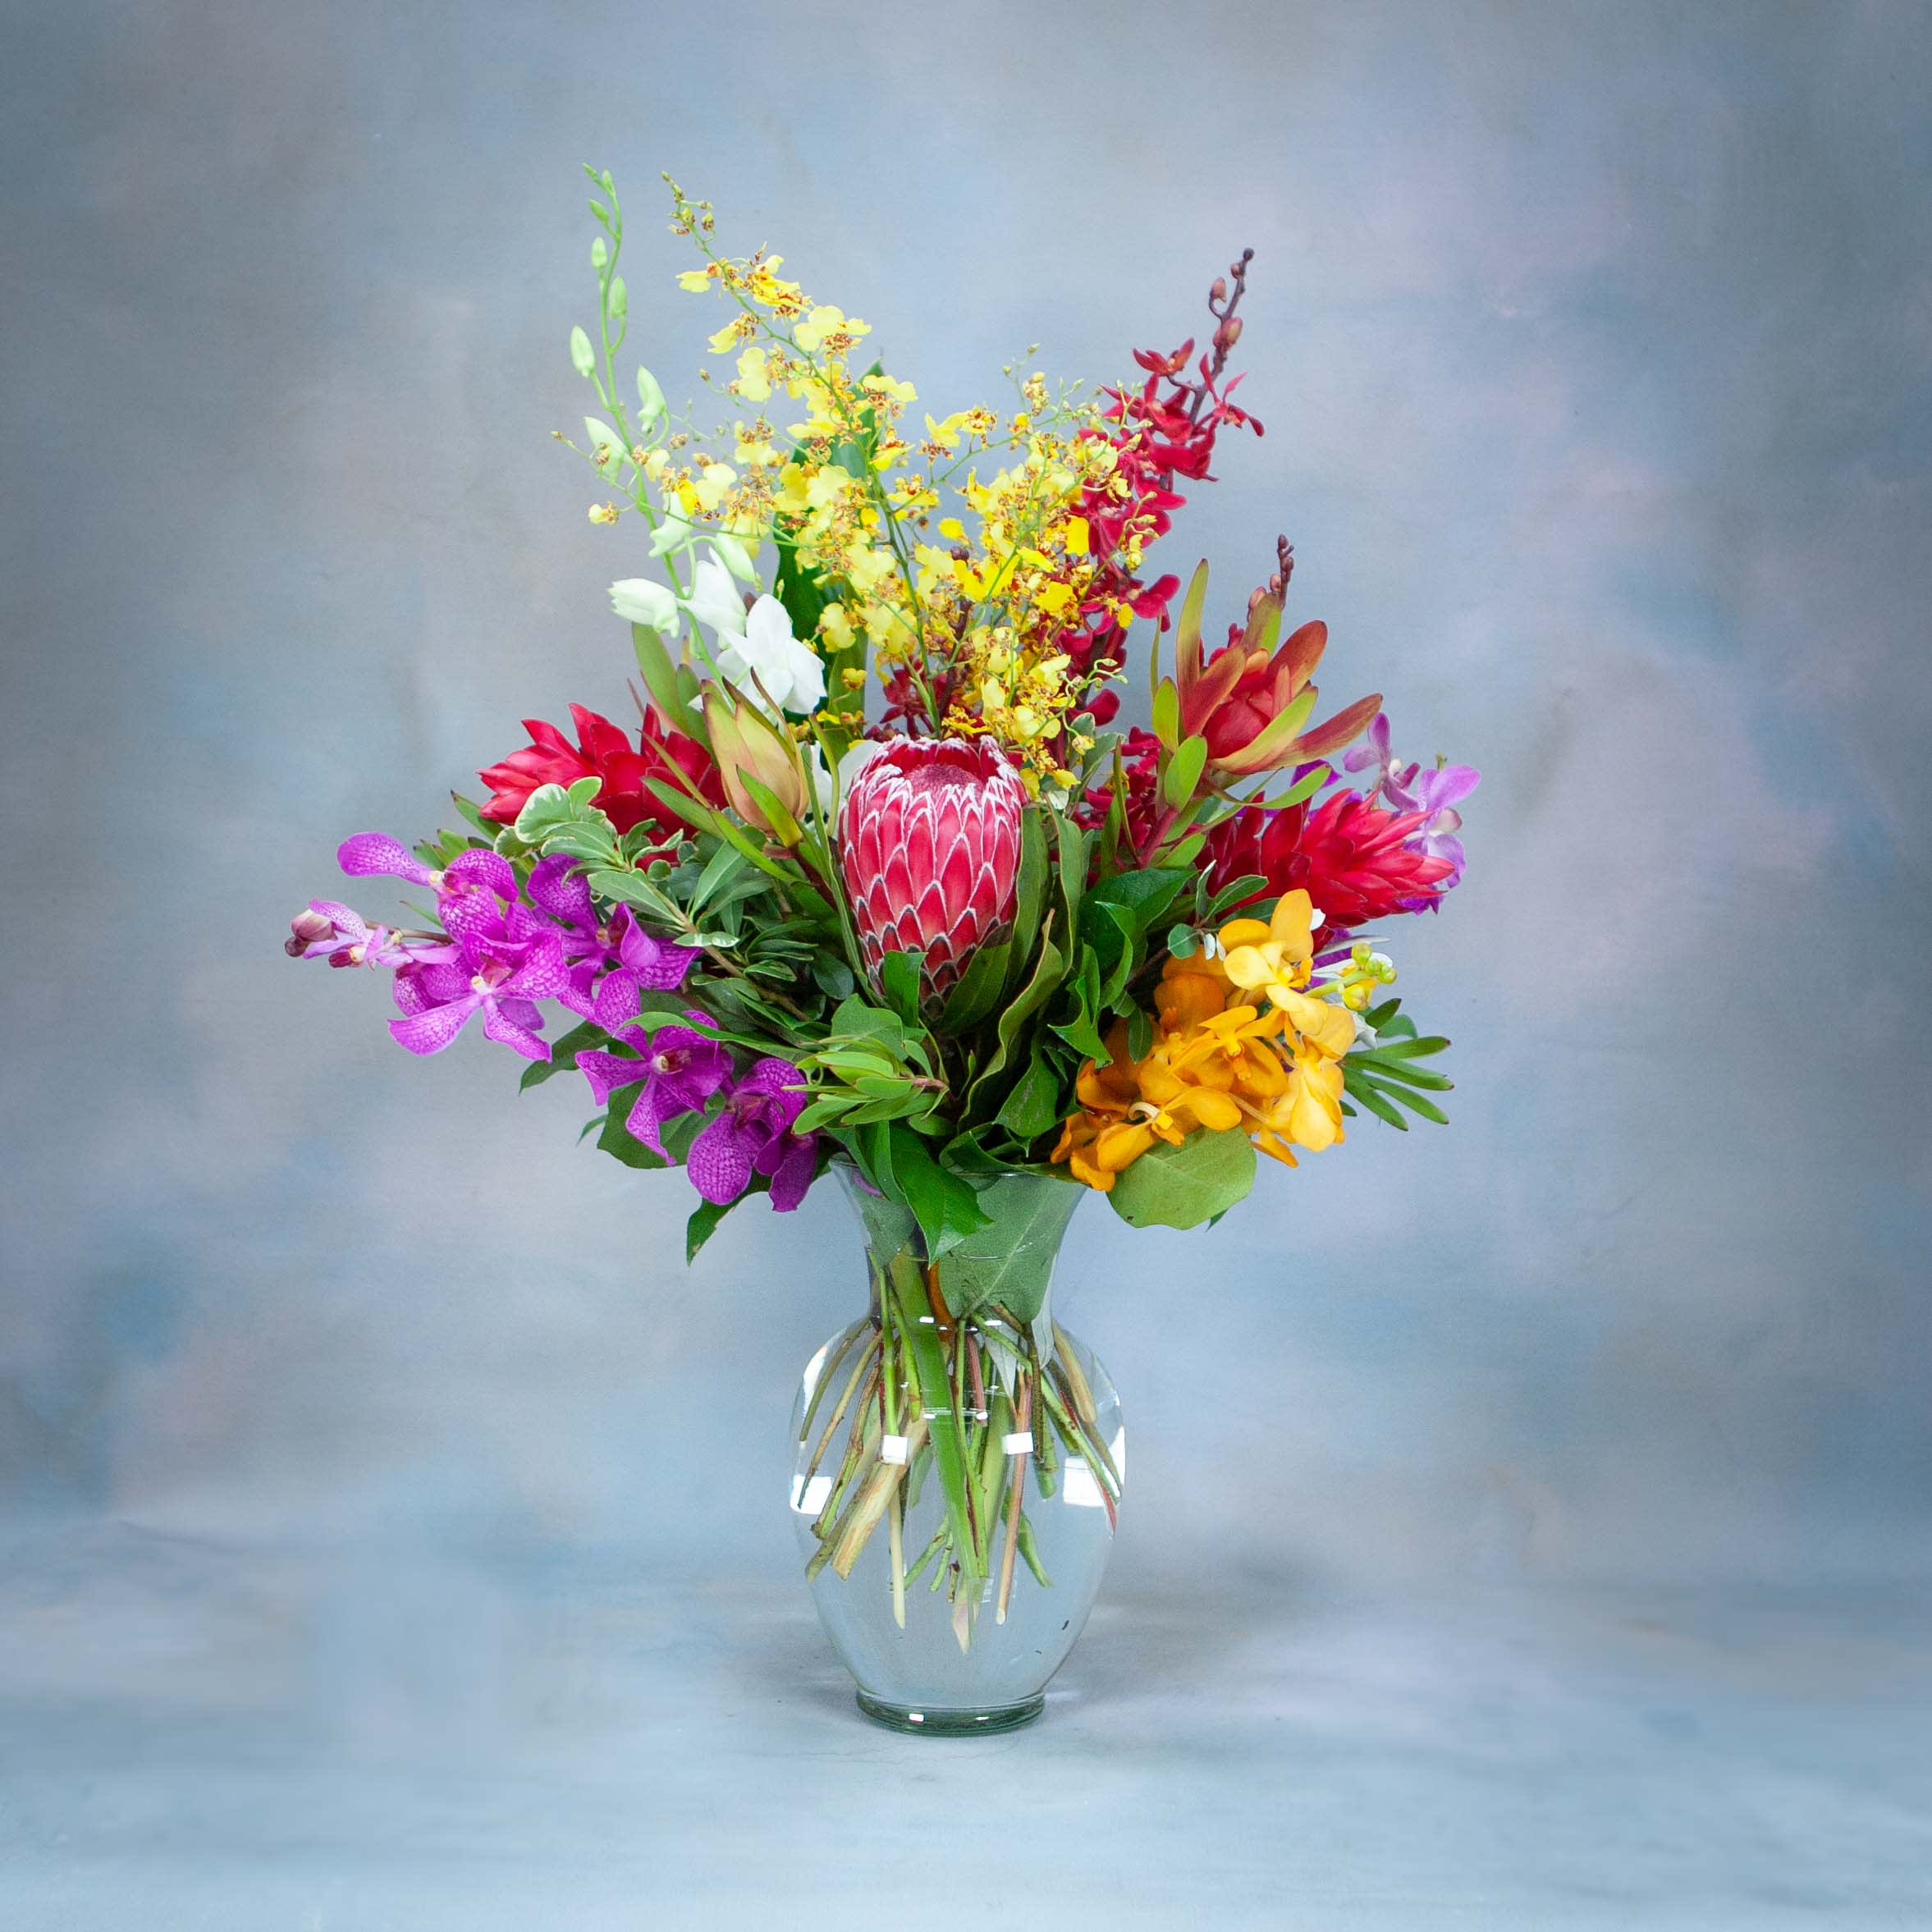 Tropical Protea Delight (SF336) - A unique and stunning arrangement filled with tropical flowers and lush greens.  In this arrangement: - 2 Cerise Candida proteas - 2 red ginger - 10 stems of mixed orchids (mokara, jamestory, dendrobium, oncidium) - Safari sunsets and other assorted fresh greenery